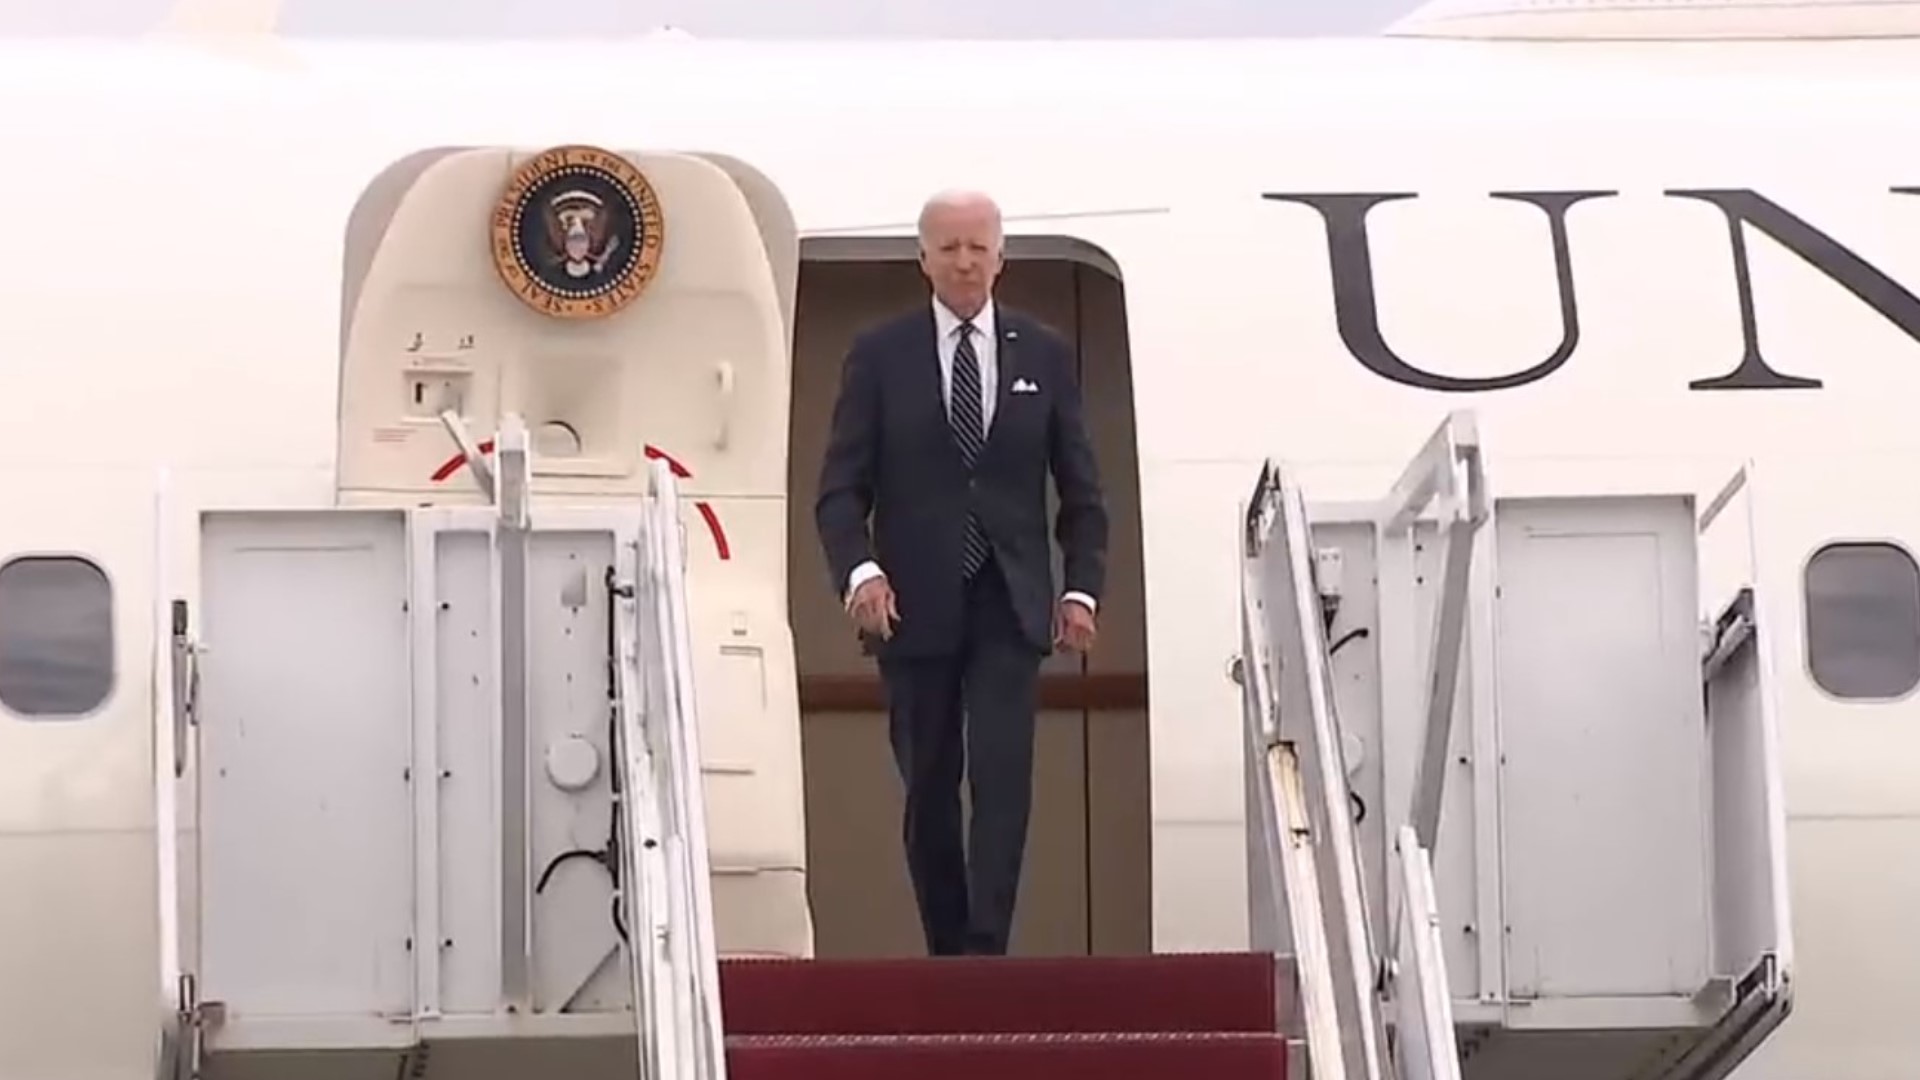 The president is back in our area for a private visitation with the Casey family after the death of former Pennsylvania First Lady Ellen Casey.